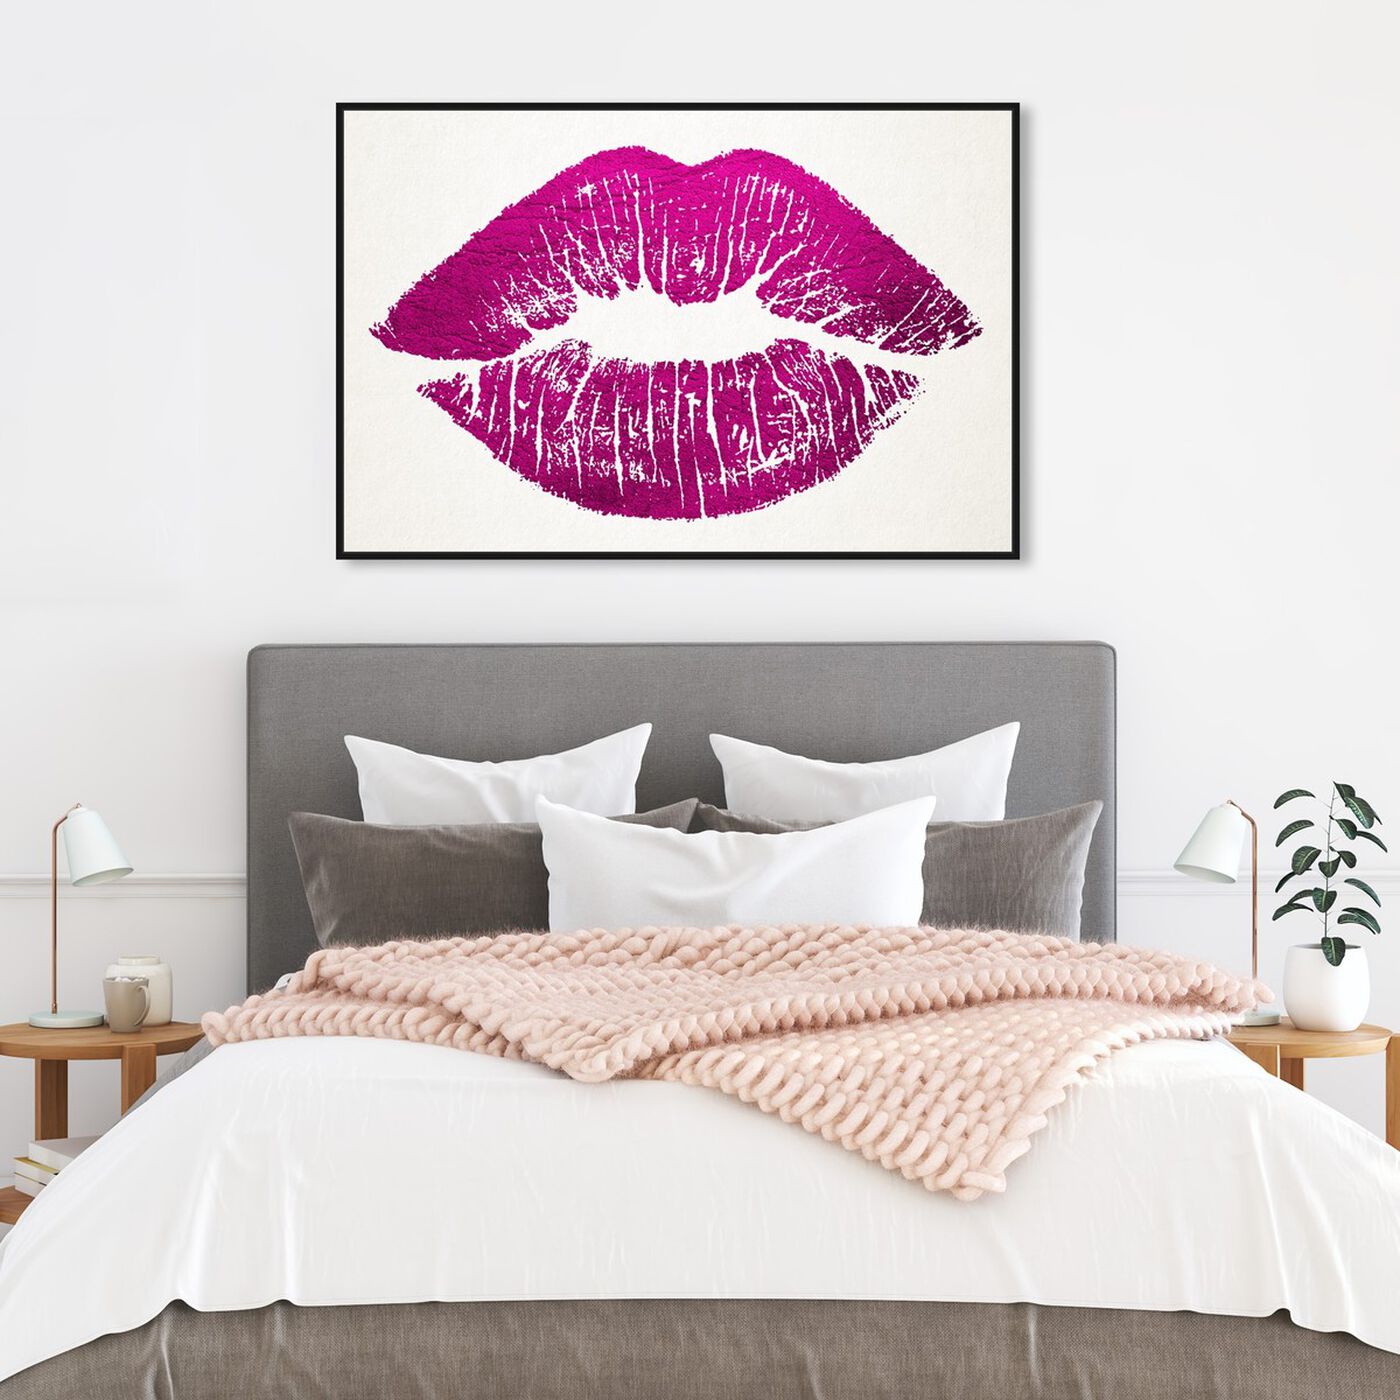 Oliver Gal 'Kiss Me Number 1' Fashion and Glam Wall Art Framed Canvas Print Perfumes - Purple, Gray - 20 x 20 - White